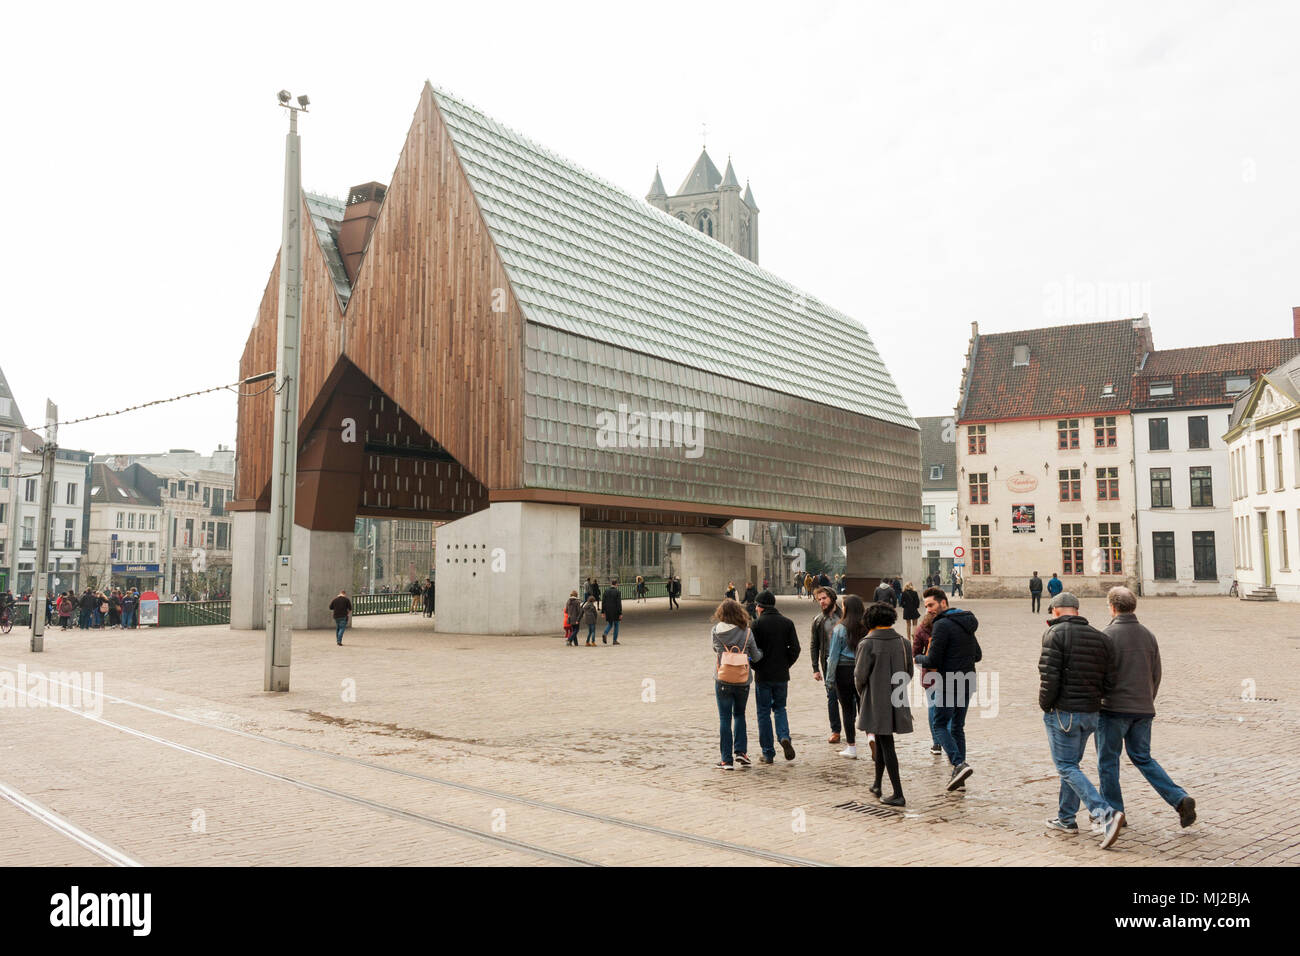 A view of the Stadshal (City Pavilion) from Botermarkt, Ghent, Belgium, 2018 Stock Photo